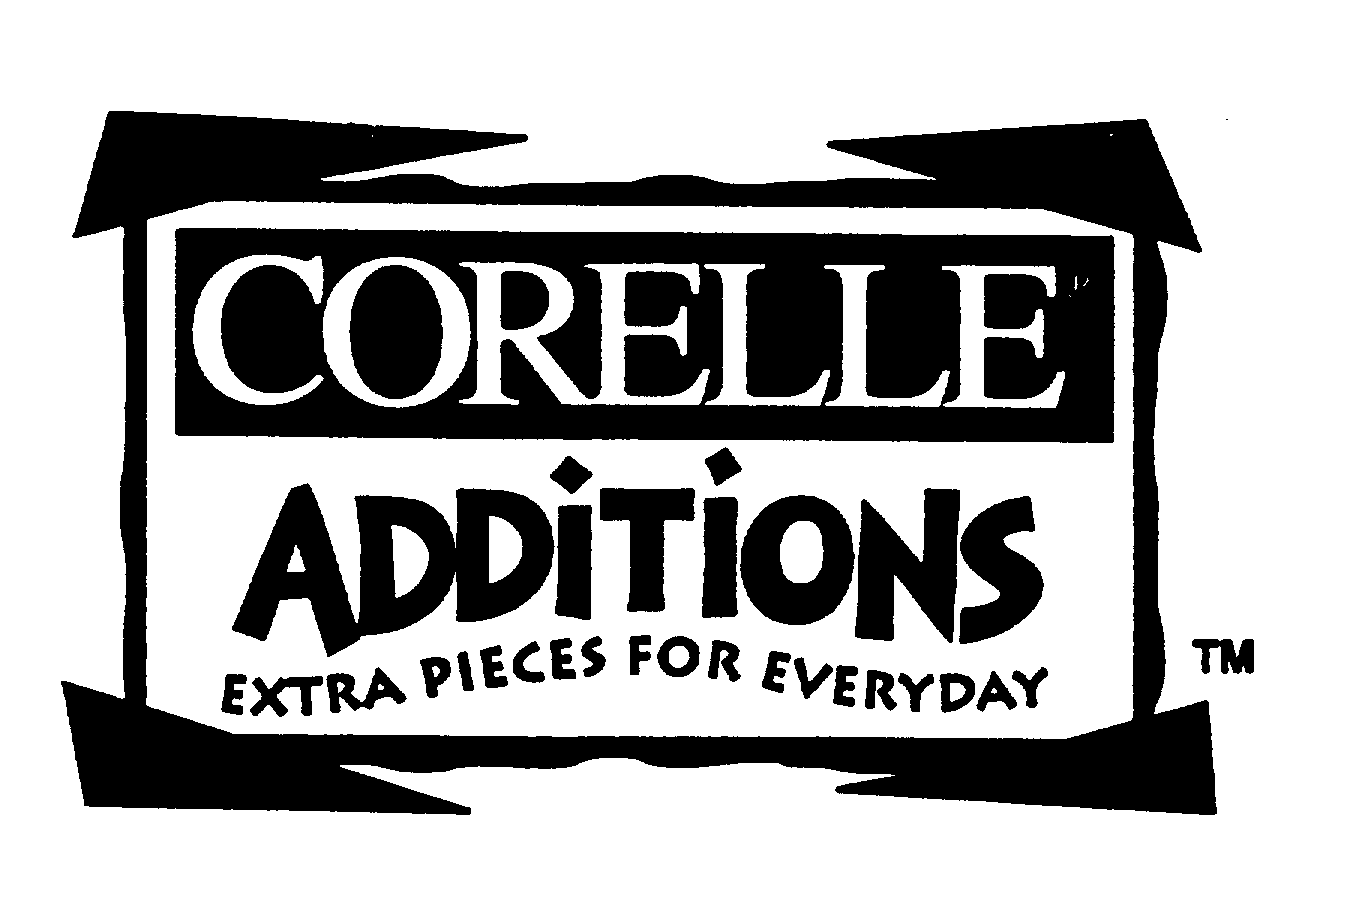  CORELLE ADDITIONS EXTRA PIECES FOR EVERYDAY